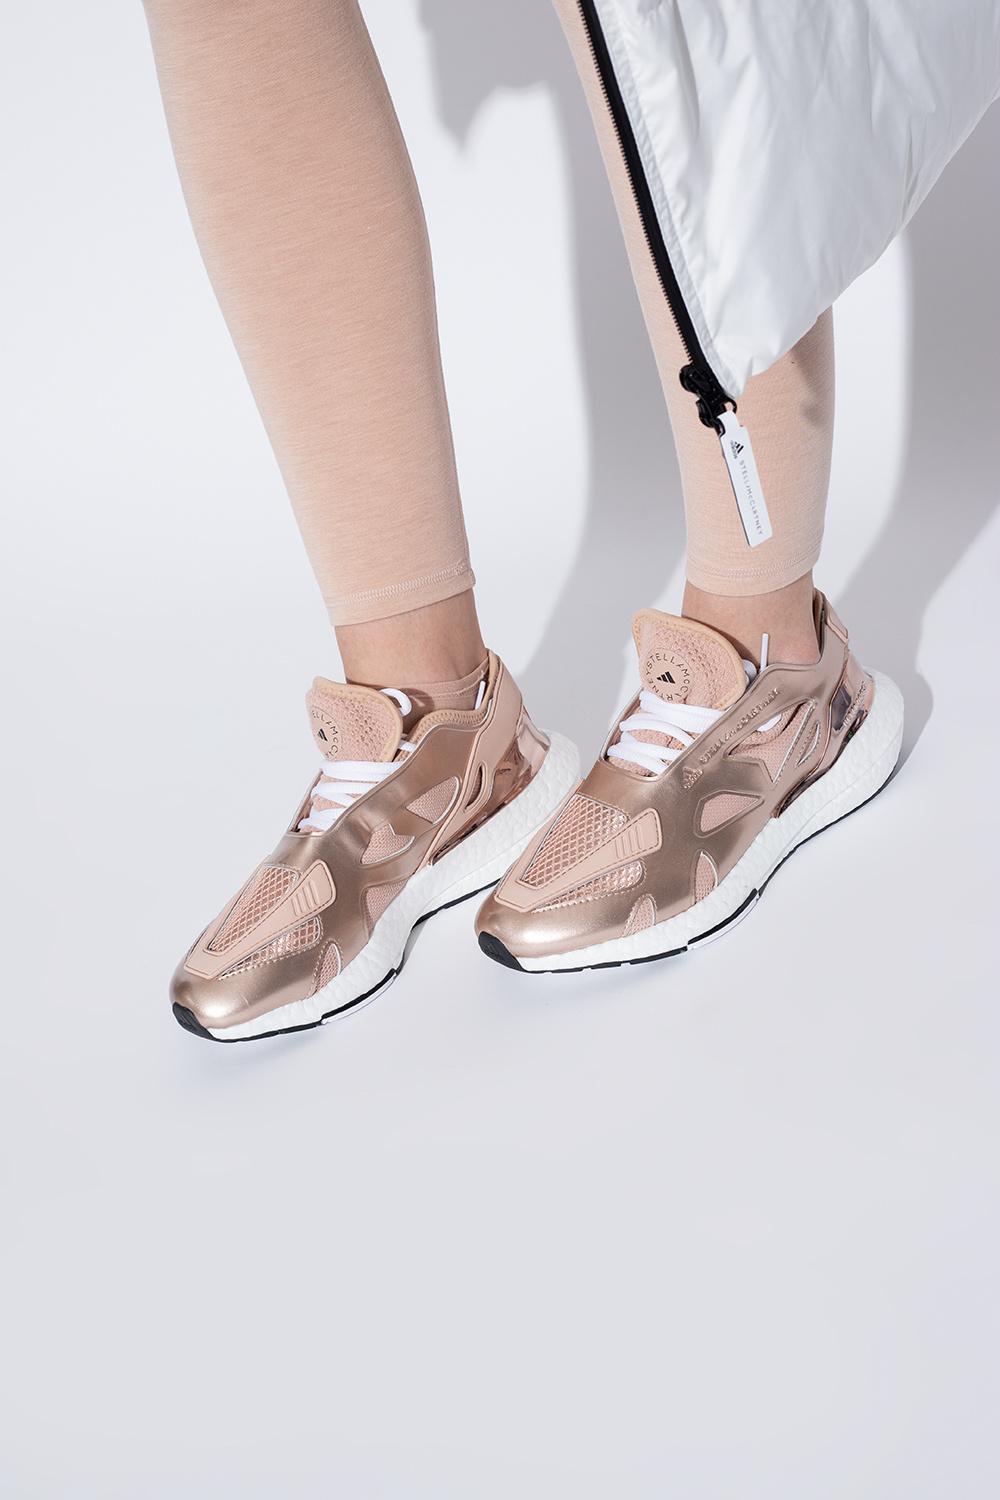 Adidas By Stella Mccartney Gold Trainer Sneakers